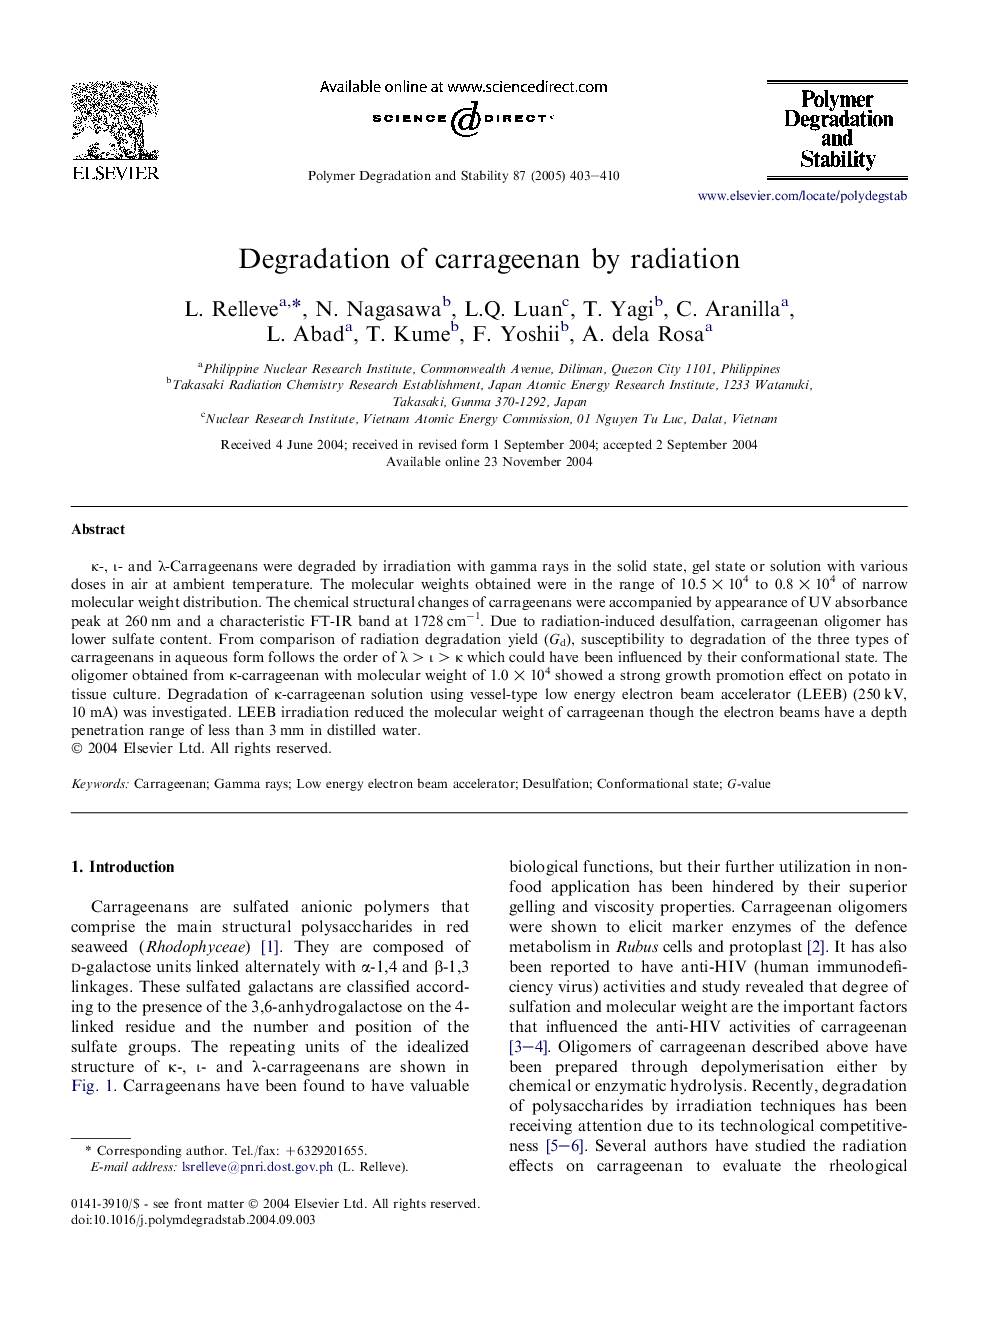 Degradation of carrageenan by radiation